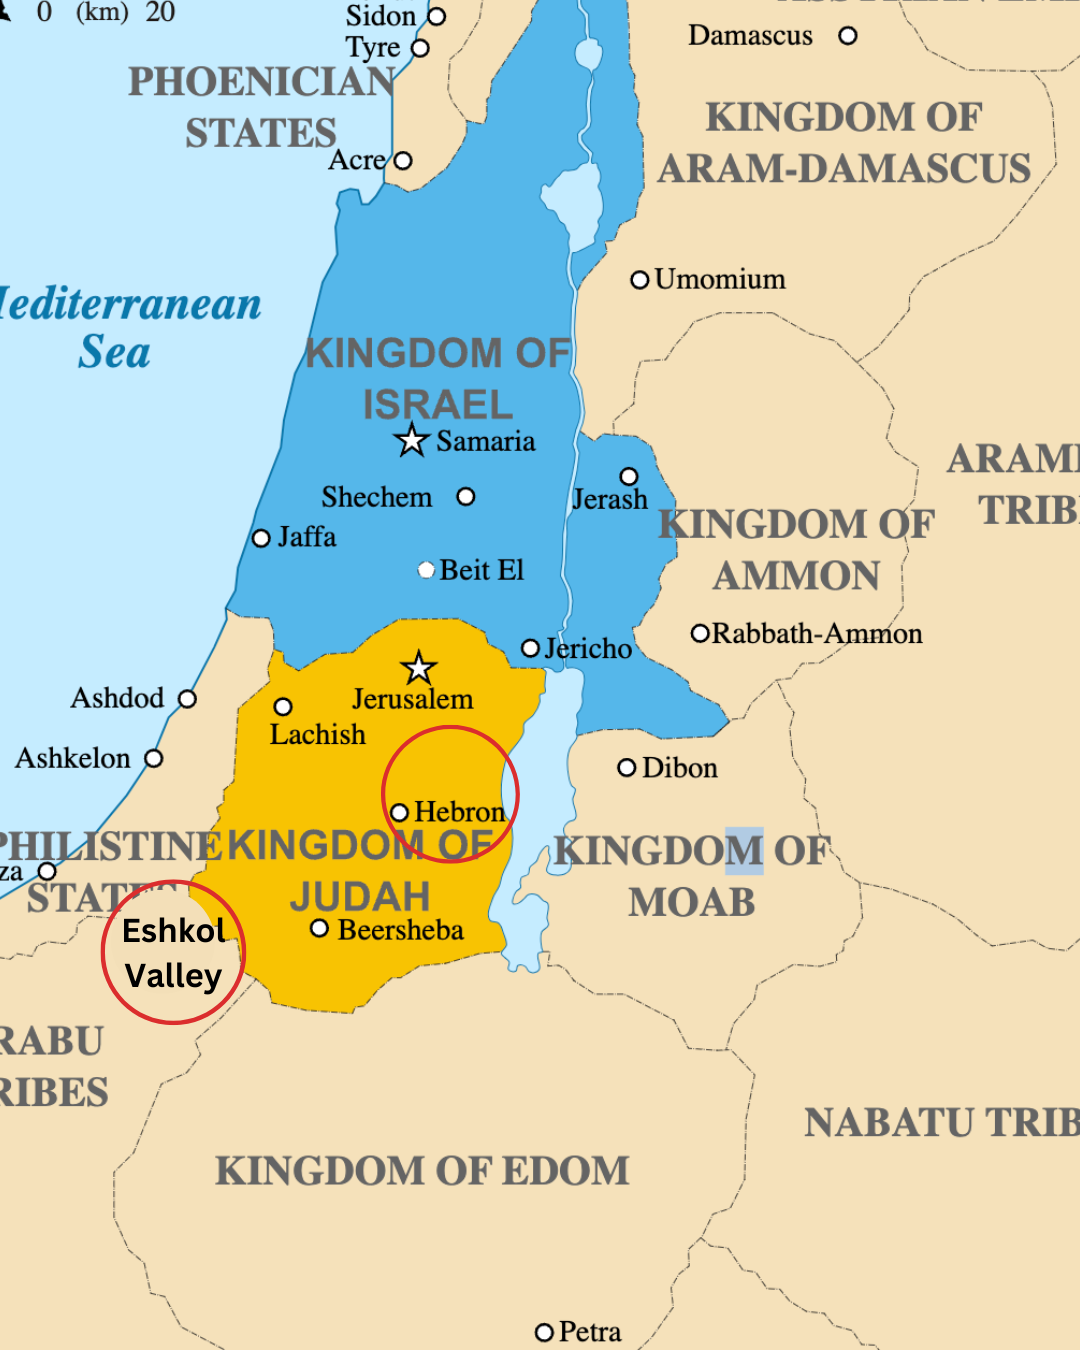 Ancient near east map, marked with Eshkol Valley and Hebron circled.